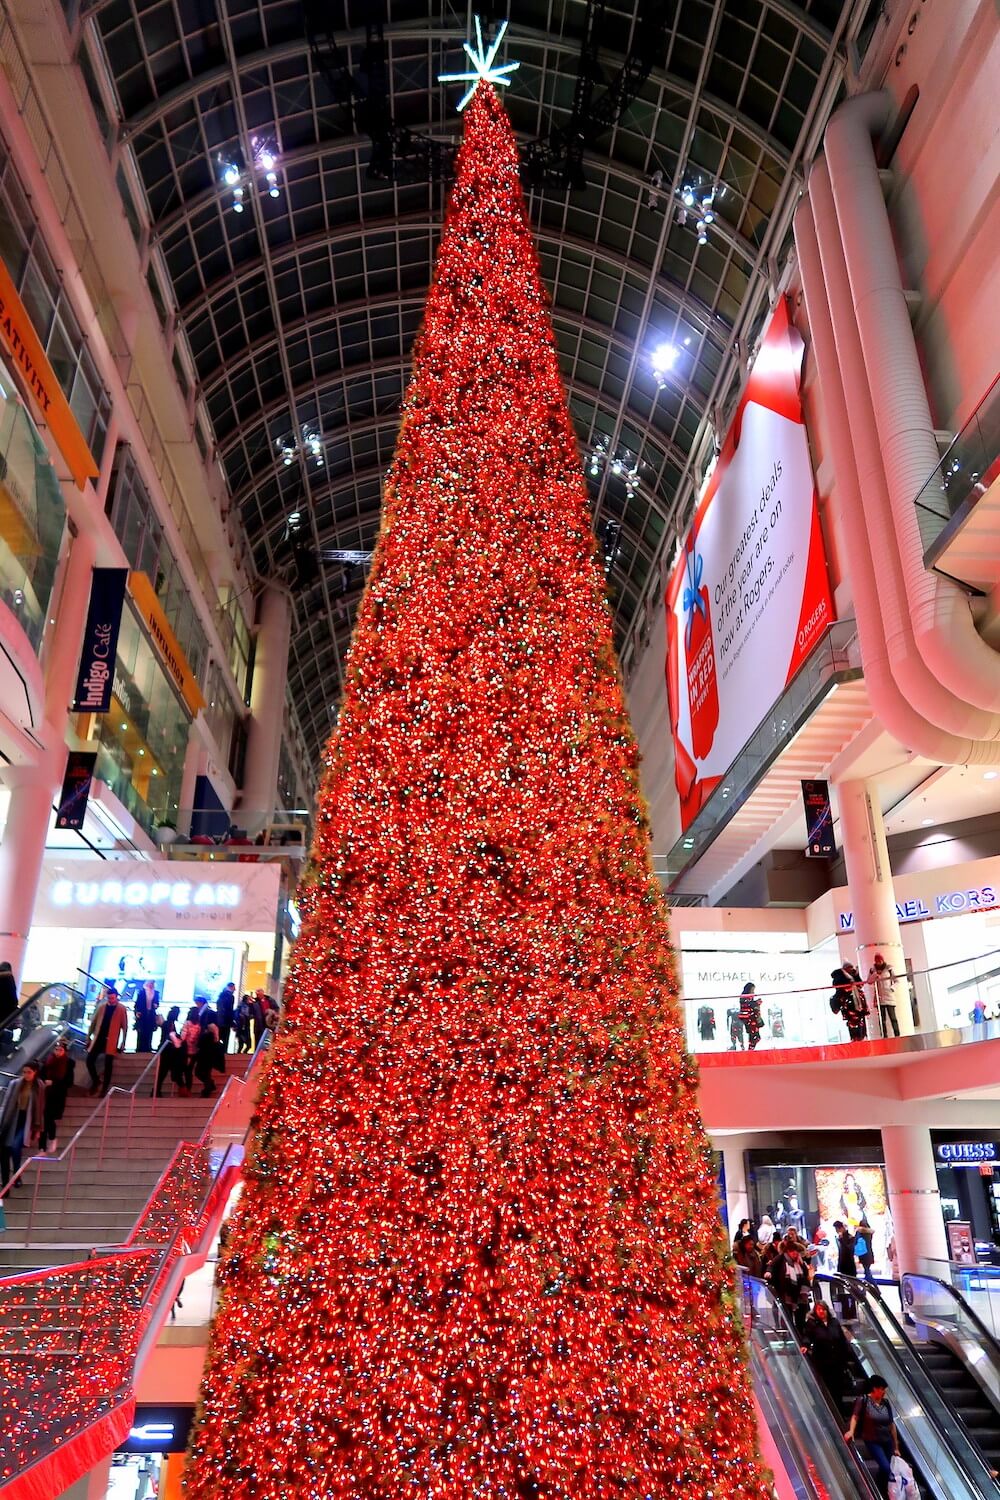 Looking for some cheap & free things in Toronto at Christmas time? This guide is for you! Toronto has so many incredibly fun & festive yet affordable activities to do during the Christmas season. From the Santa Claus parade to magical light displays, this guide includes all of the free and cheap activities to do in Toronto this holiday season. Pictured here: Visit Canada's tallest Christmas tree